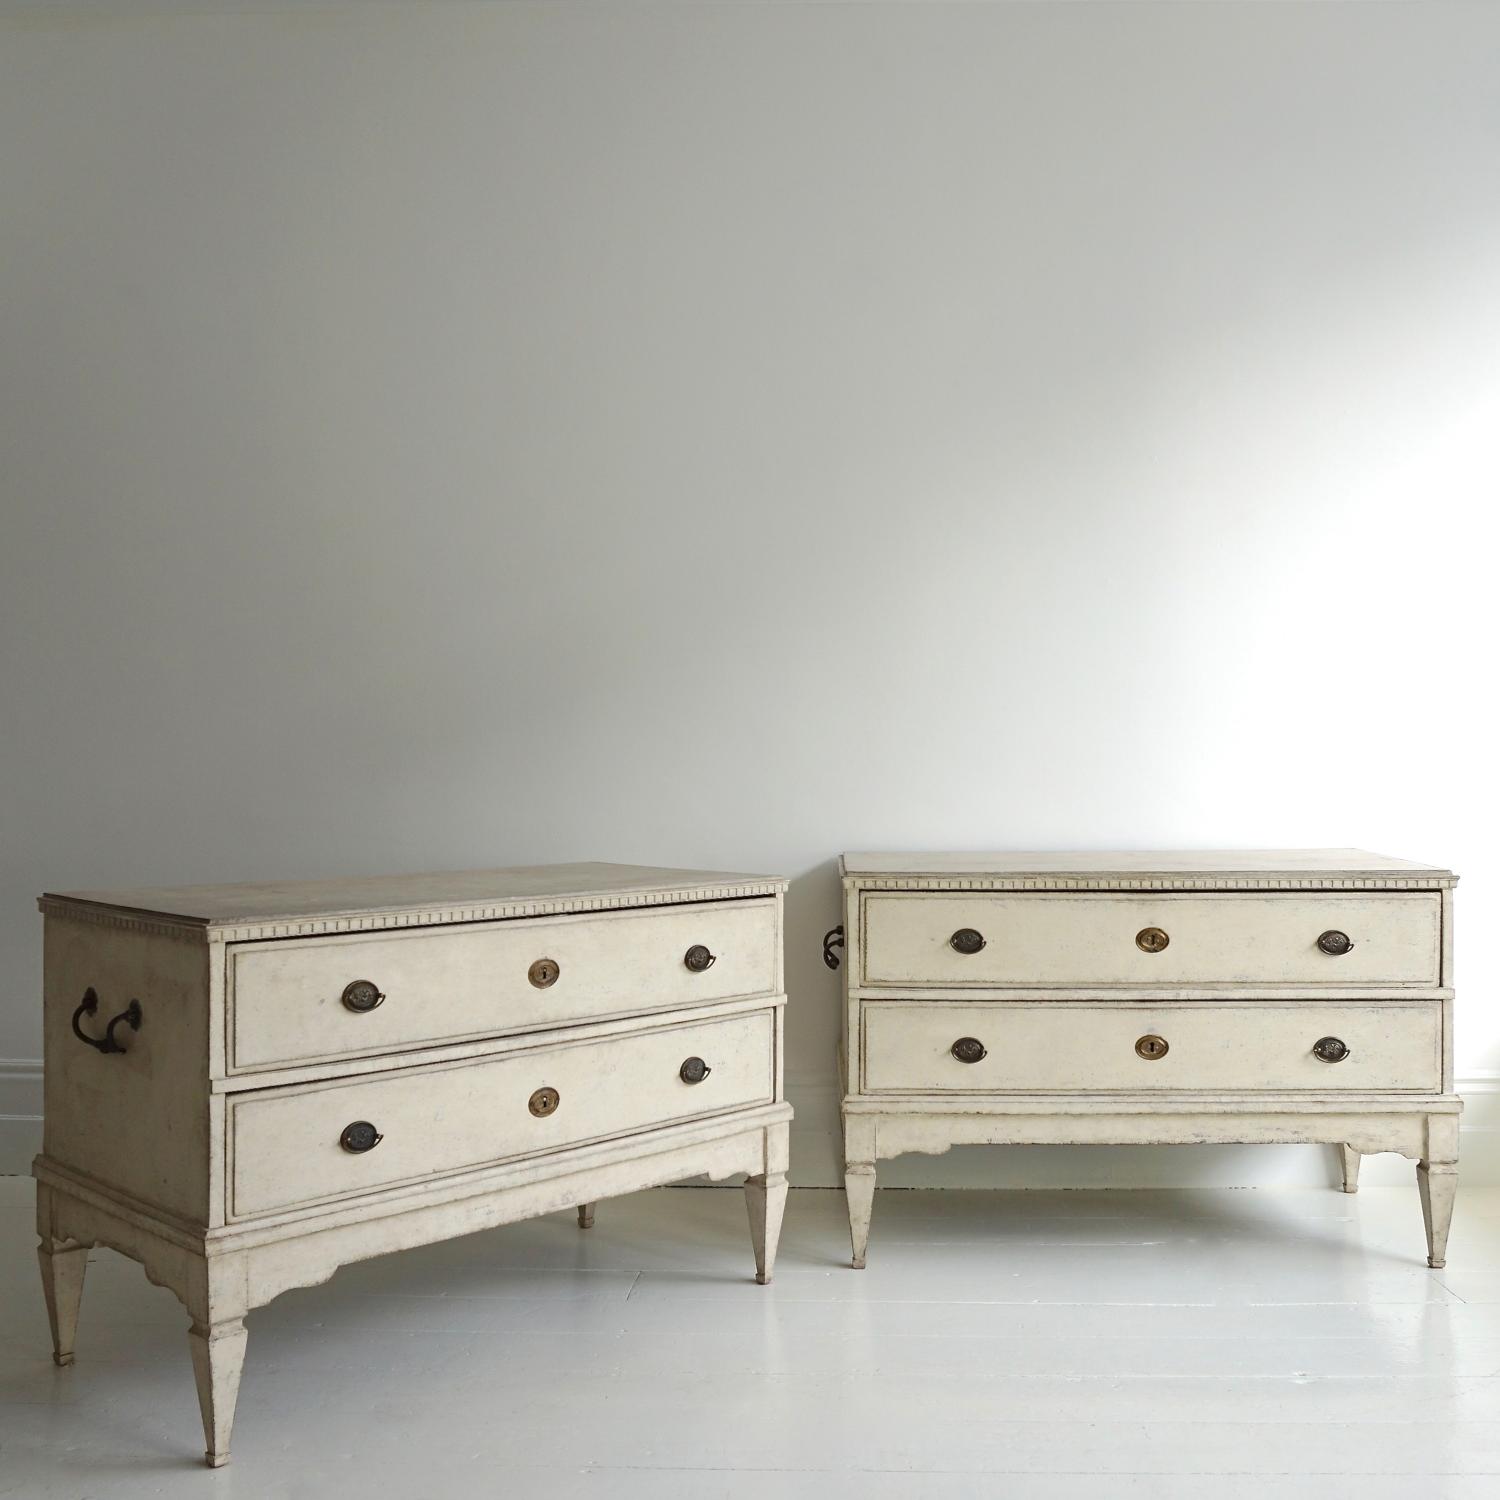 PAIR OF RARE GUSTAVIAN PERIOD CHESTS